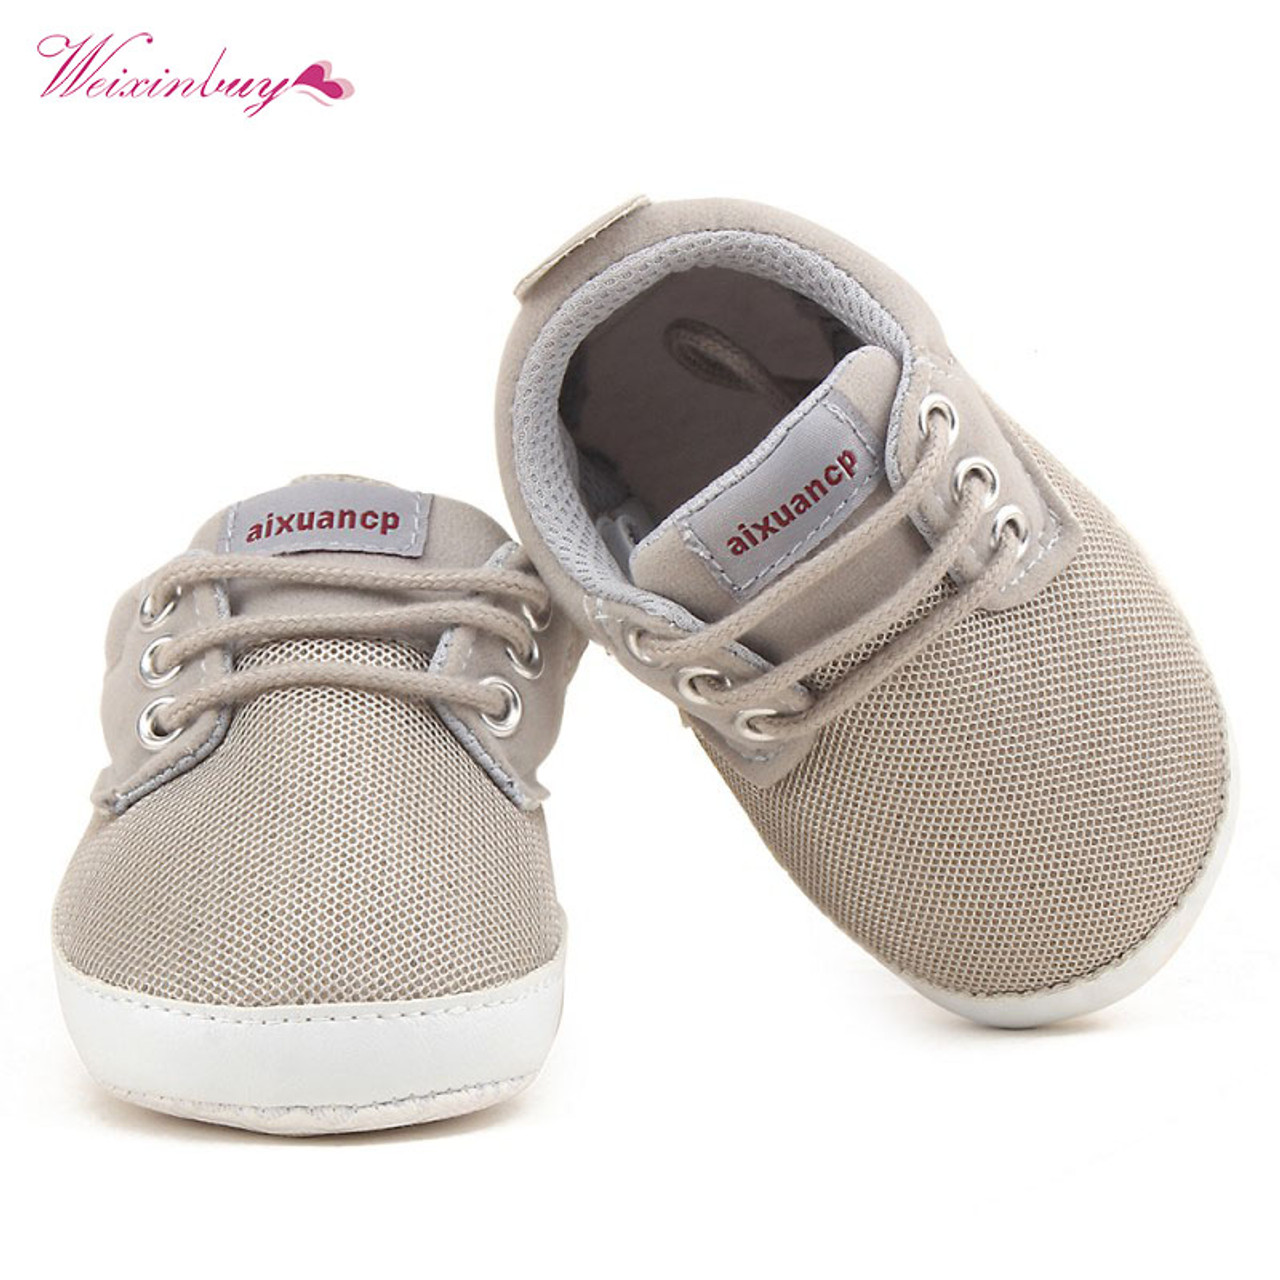 Newborn Baby Boy Shoes First Walkers 